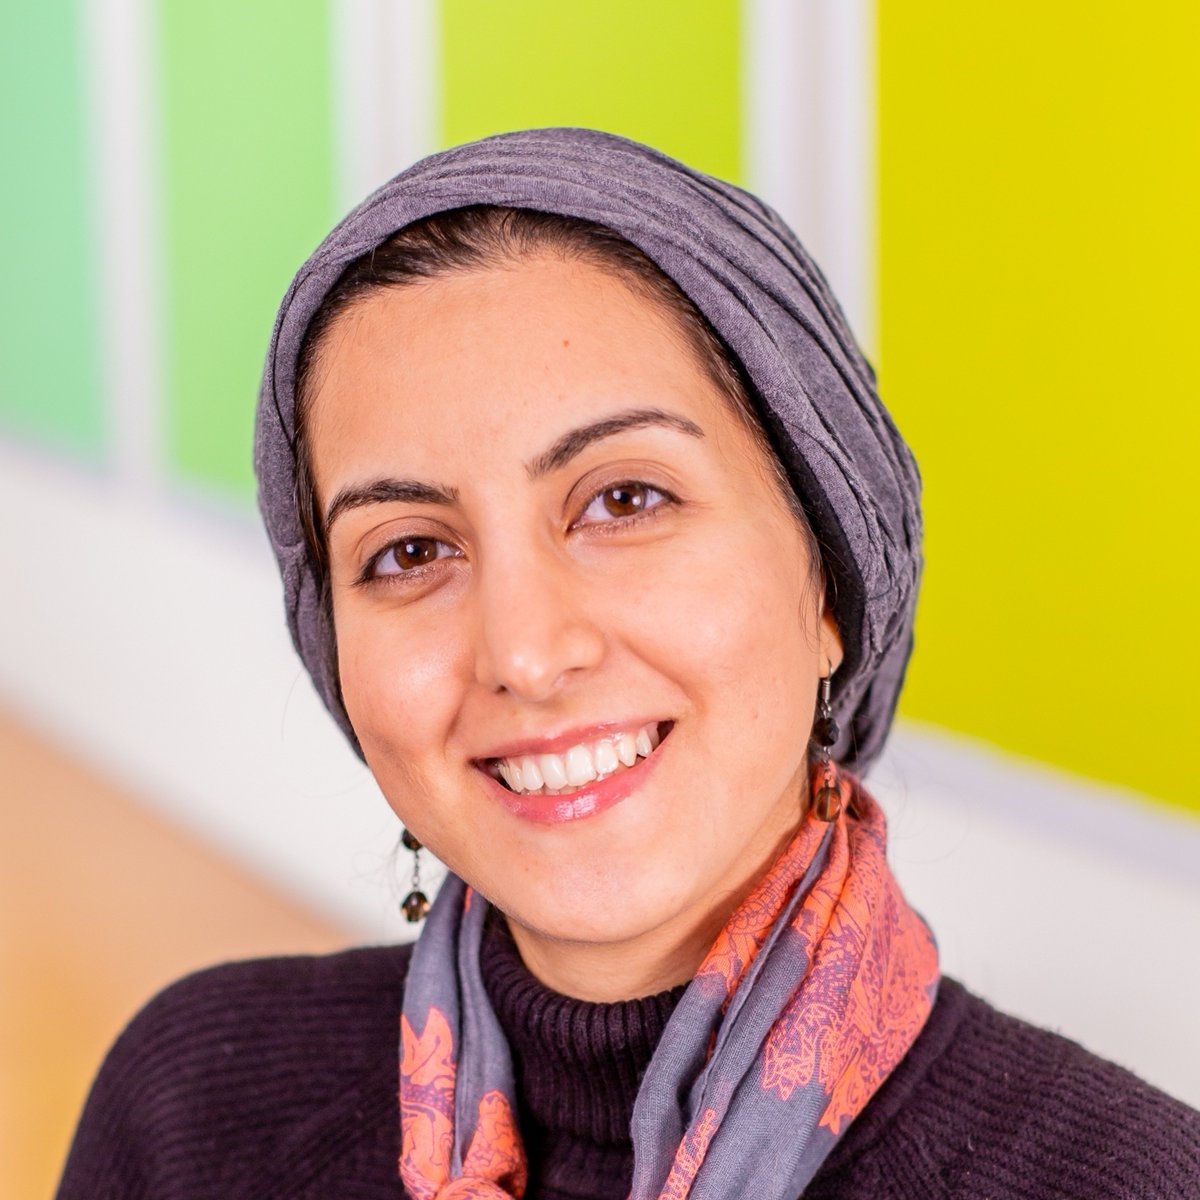 .@CornellCHE @CornellPsychDpt doctoral candidate Saeedeh Sadeghi studies how the experience of time and emotion is influenced by the body. Read her student spotlight: gradschool.cornell.edu/spotlights/stu…